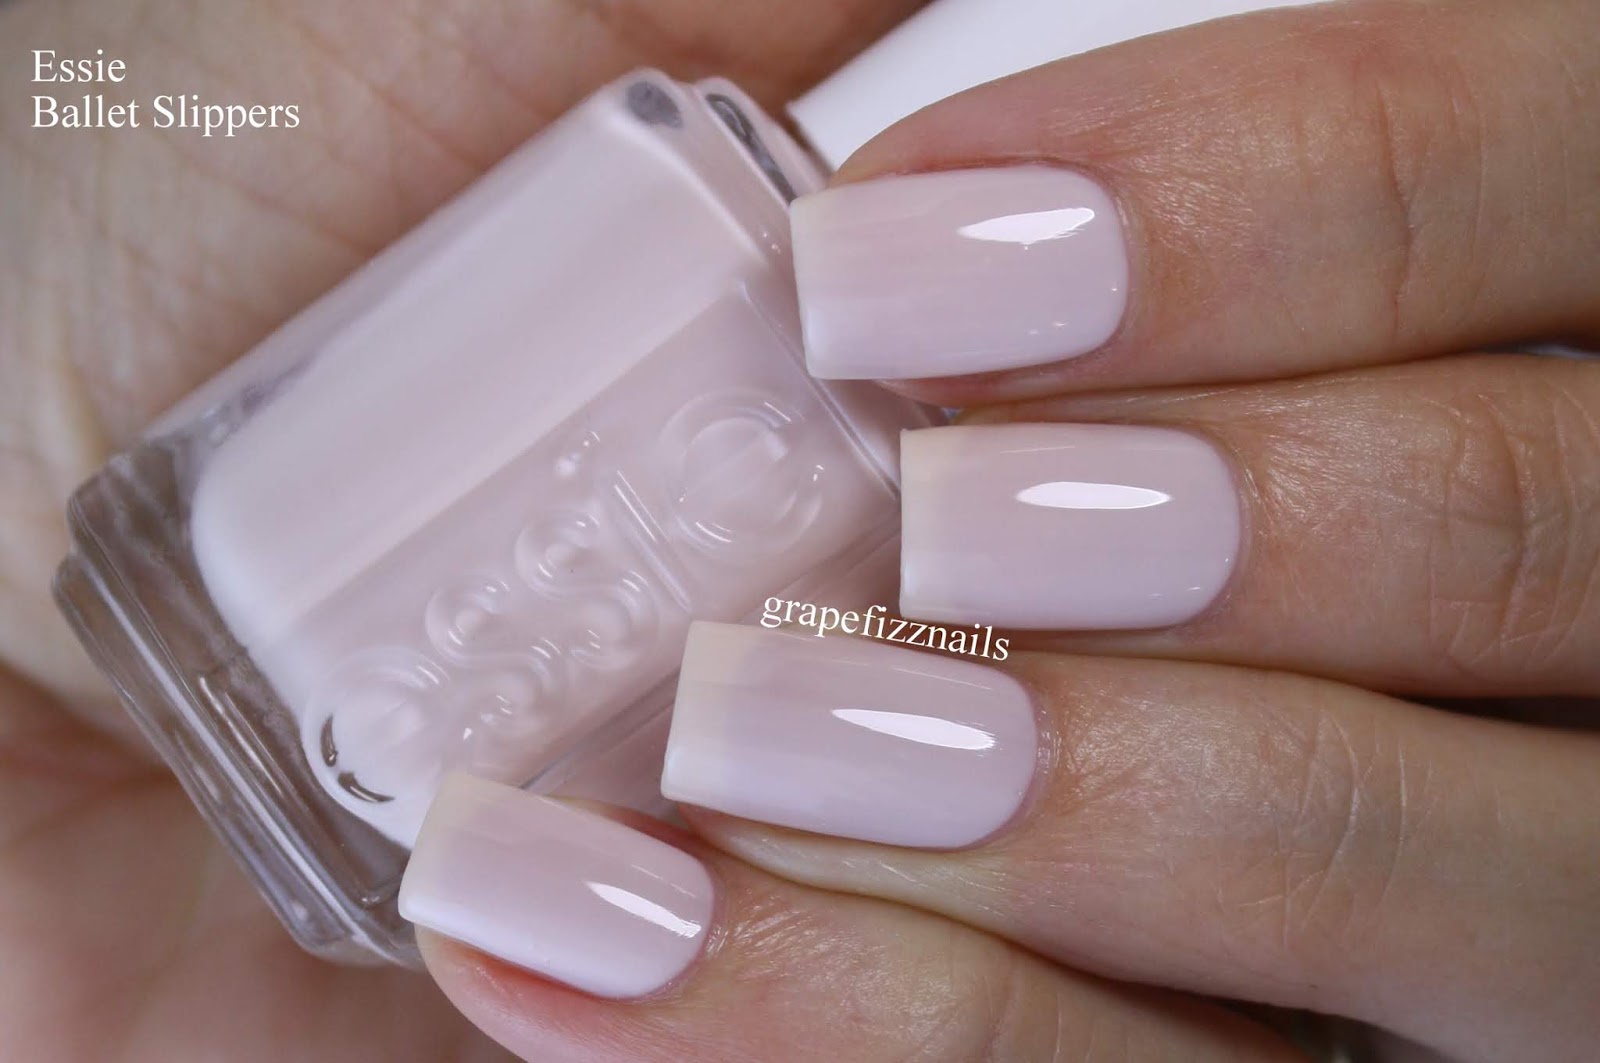 2. Essie Nail Polish in "Ballet Slippers" - wide 10